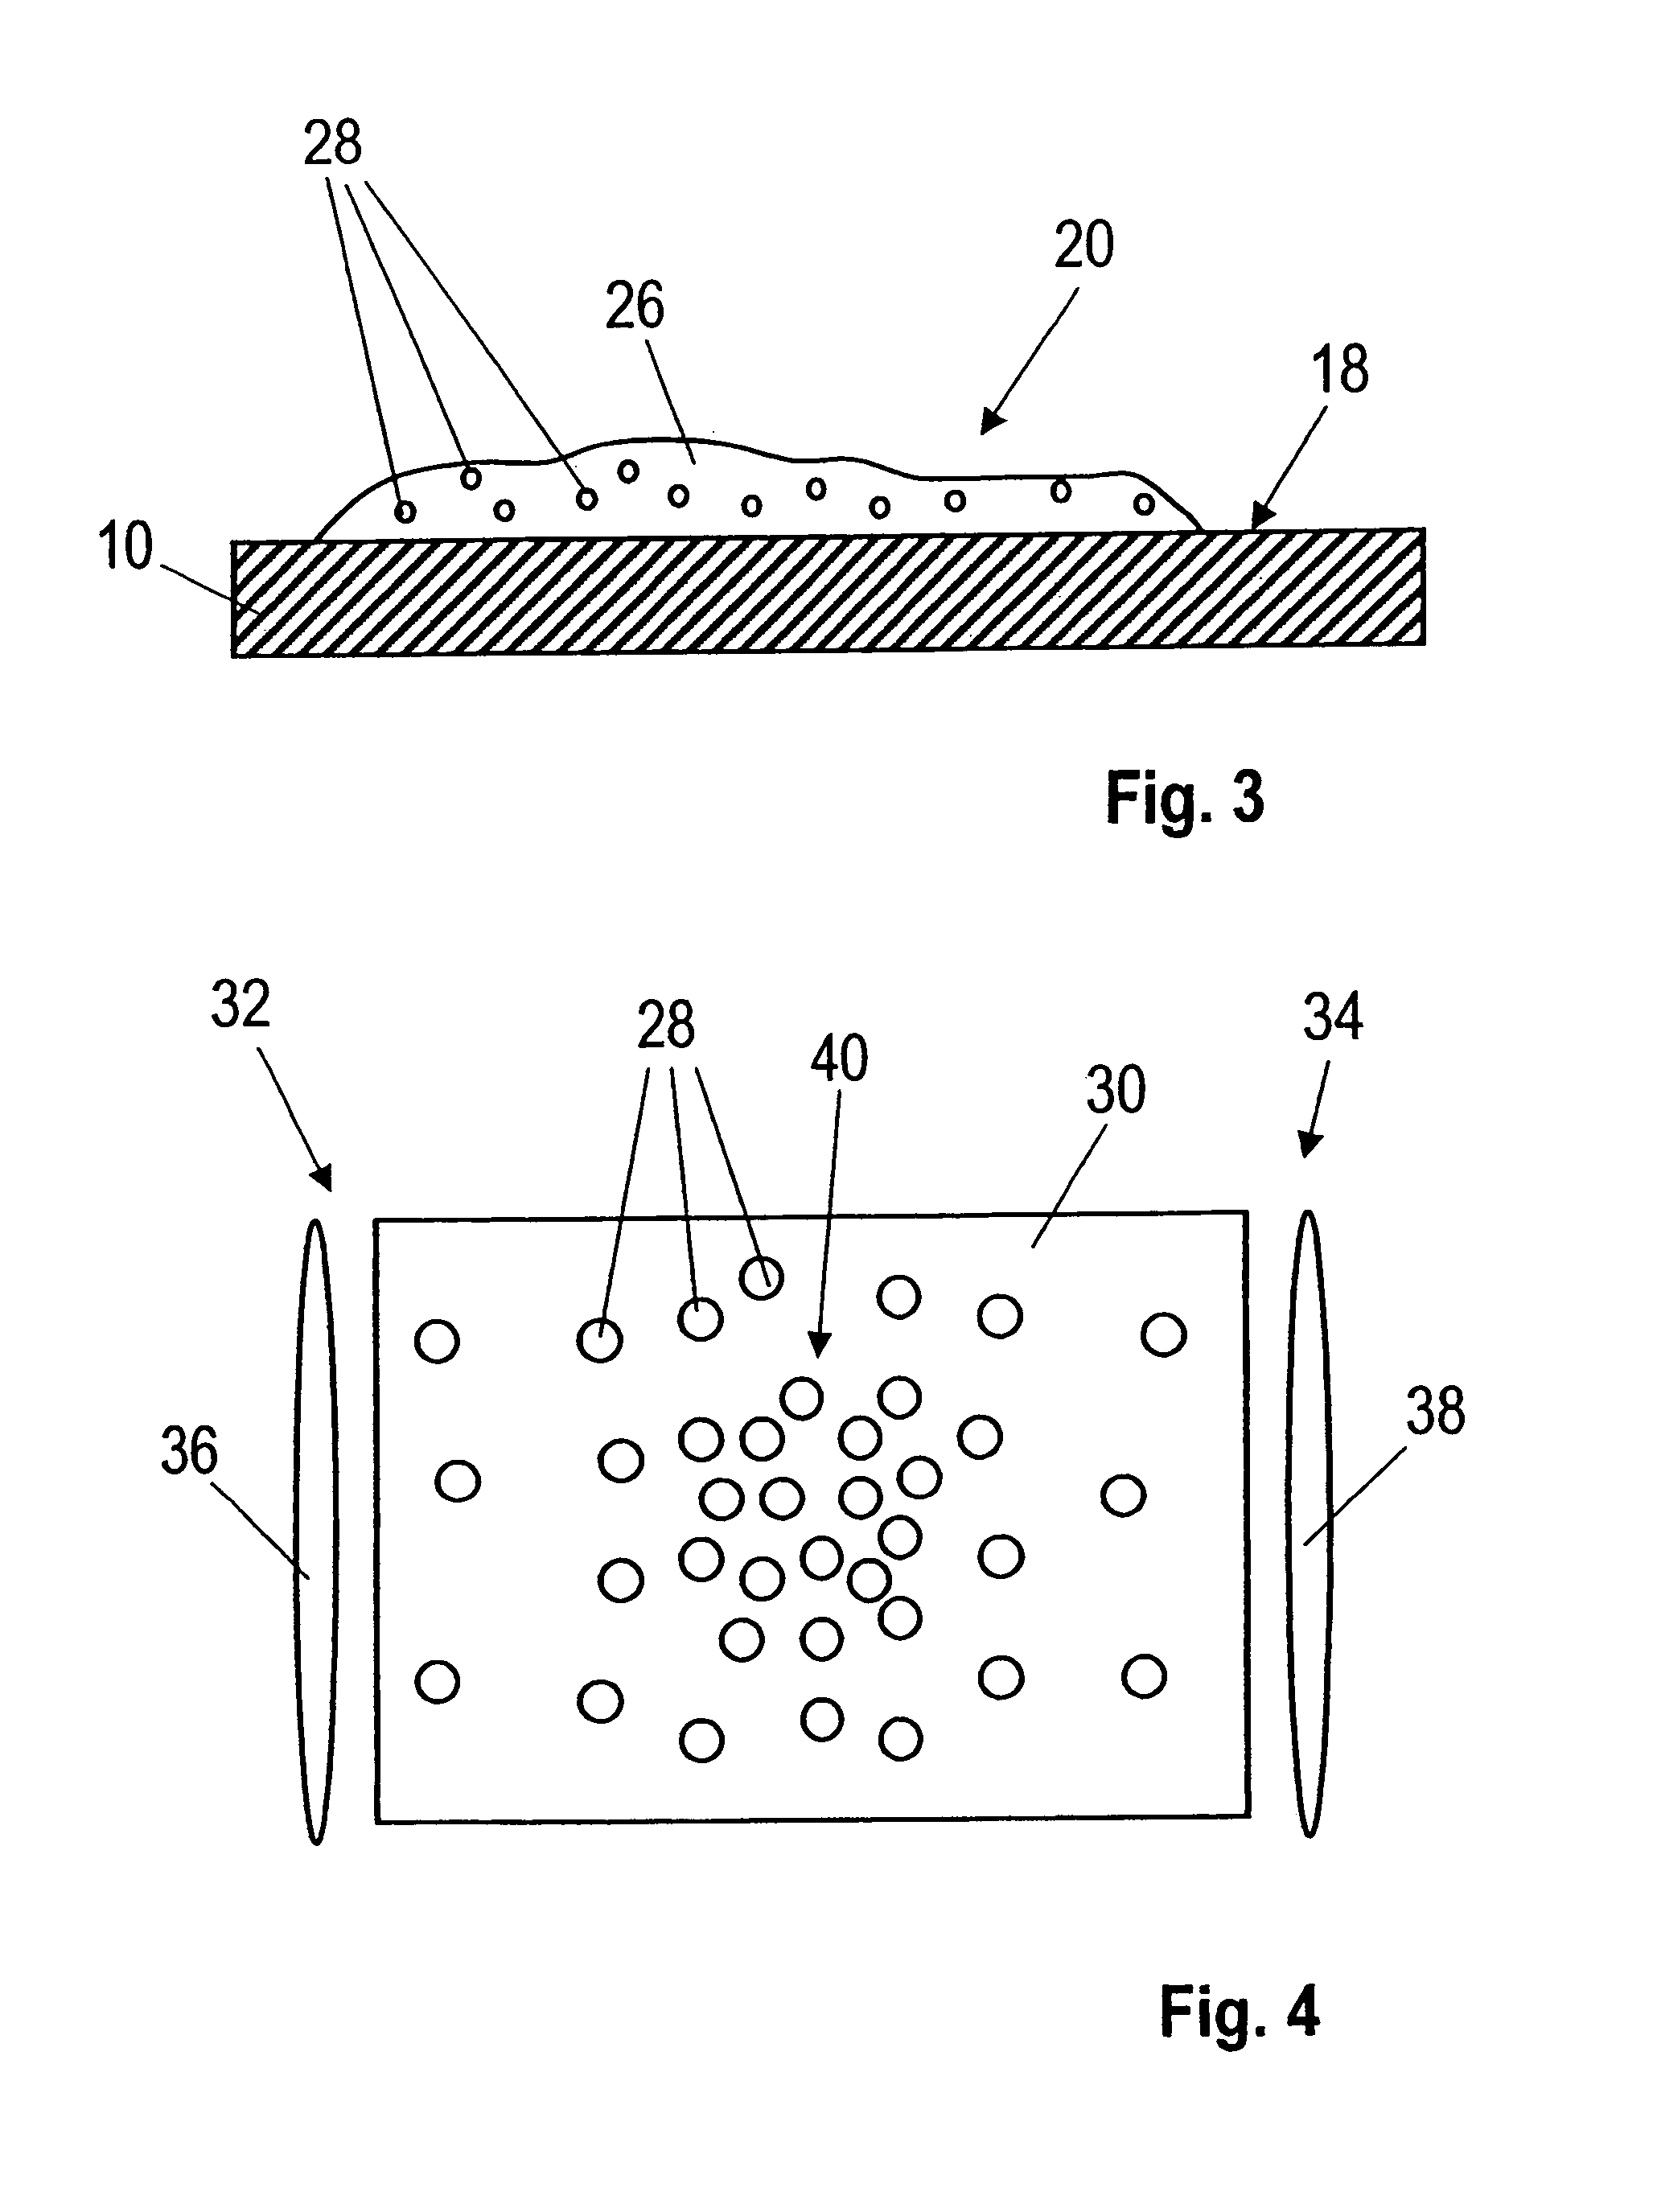 Method for producing light-scattering structures on flat optical waveguides